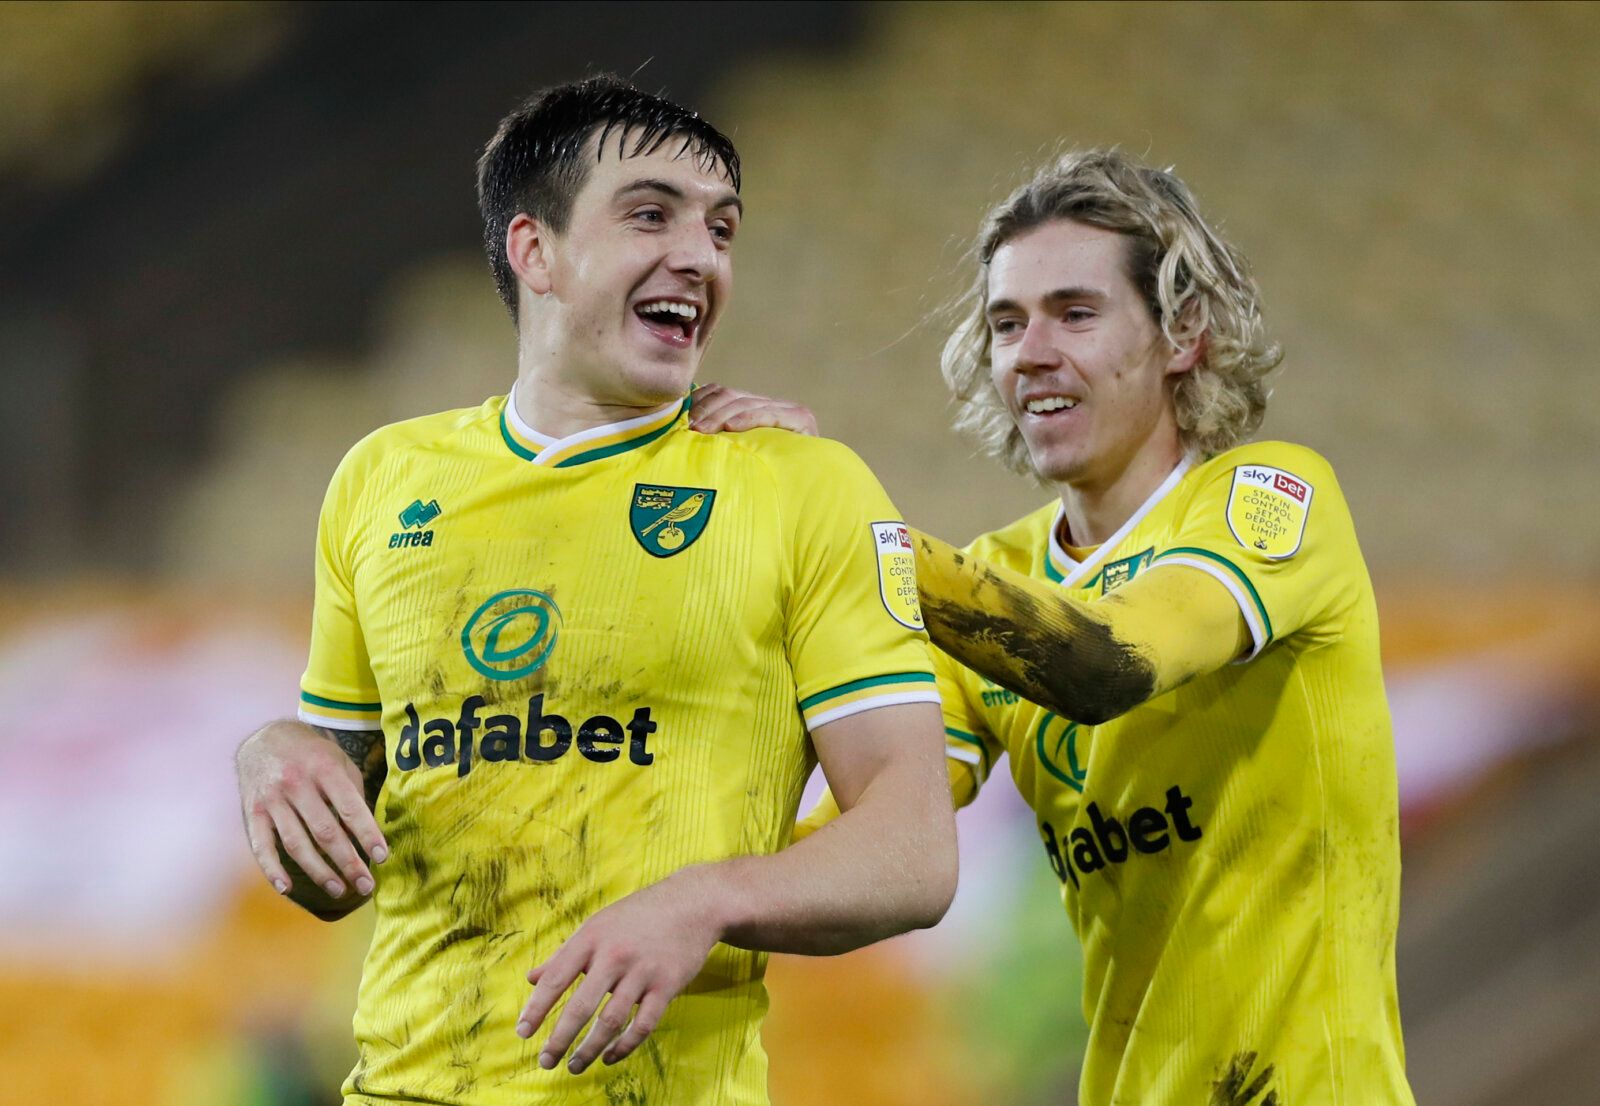 Soccer Football - Championship - Norwich City v Bristol City - Carrow Road, Norwich, Britain - January 20, 2021  Norwich City's Jordan Hugill celebrates scoring their second goal with teammates Action Images/Paul Childs EDITORIAL USE ONLY. No use with unauthorized audio, video, data, fixture lists, club/league logos or 'live' services. Online in-match use limited to 75 images, no video emulation. No use in betting, games or single club /league/player publications.  Please contact your account re